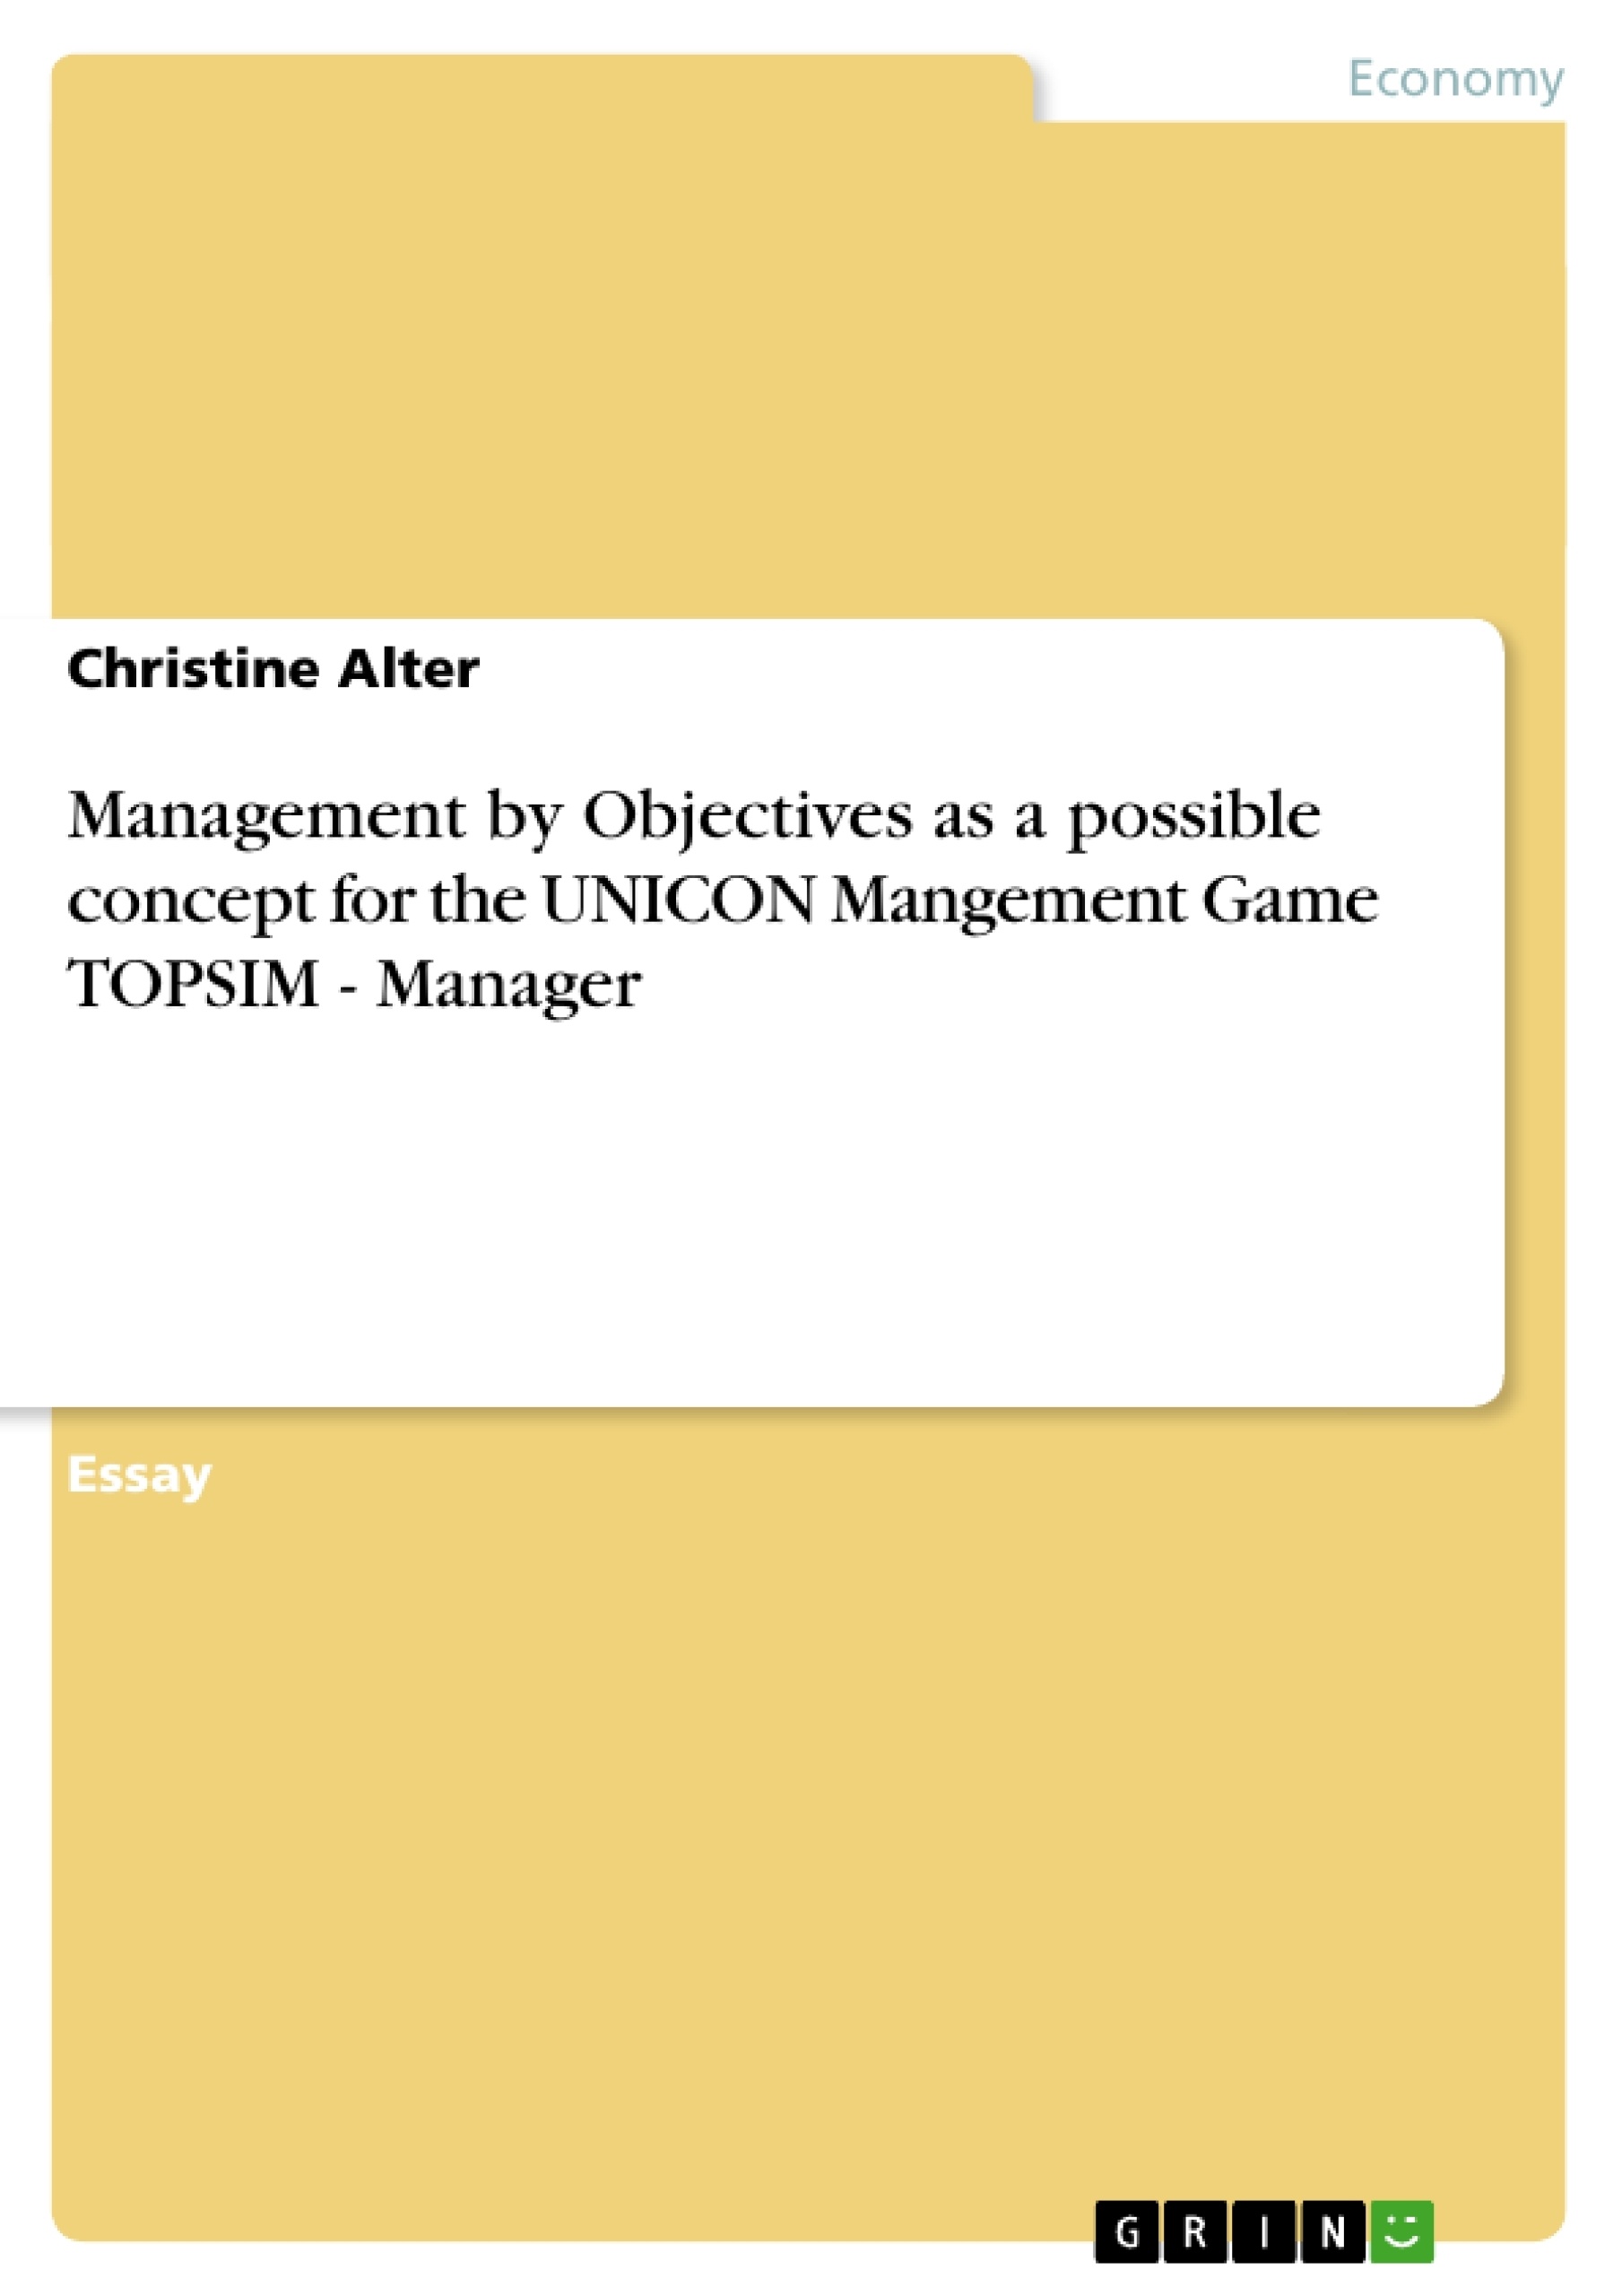 Título: Management by Objectives as a possible concept for the UNICON Mangement Game TOPSIM - Manager